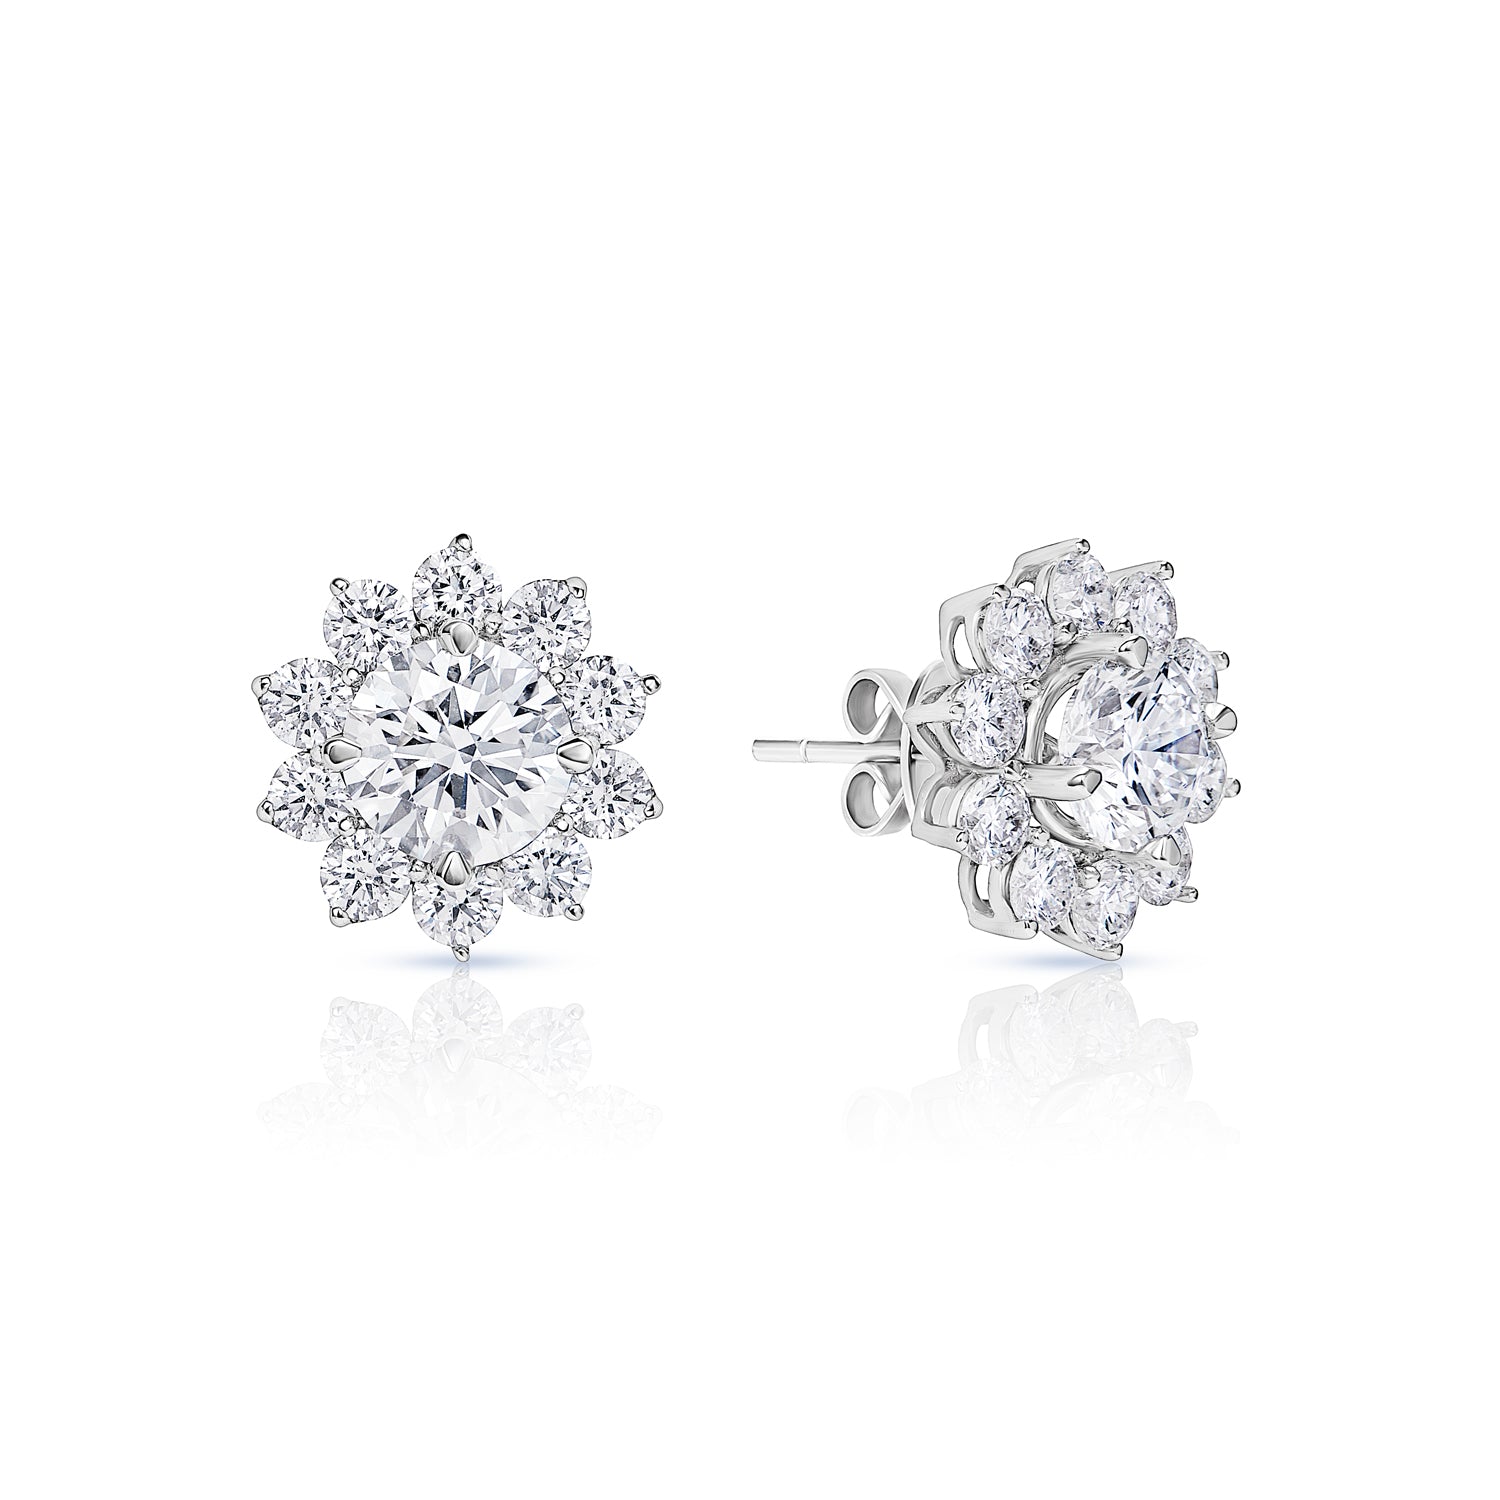 Maria 3 Carat Round Brilliant Lab Grown Diamond Stud Earrings in 18k White Gold Front and Side View